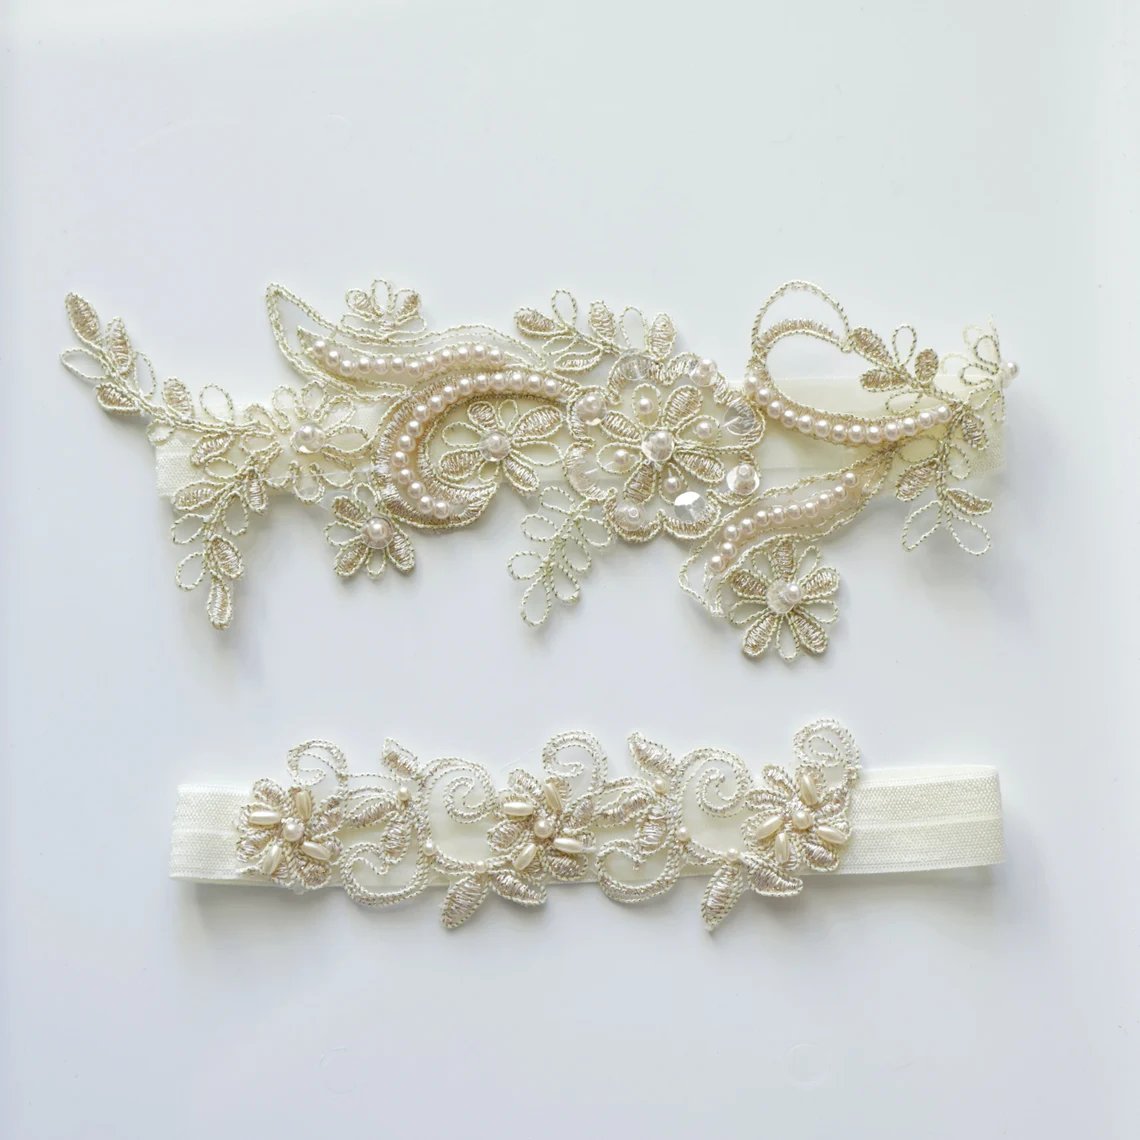 Lace and Pearl Bridal Garter Set